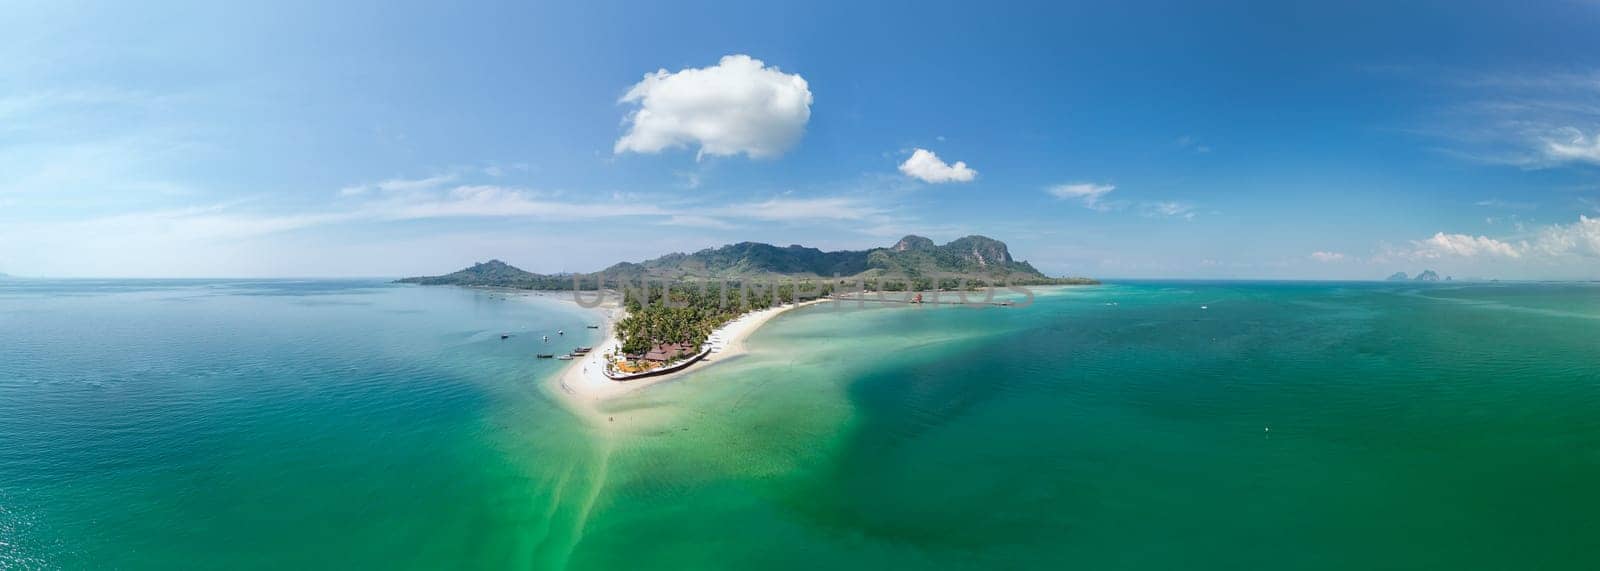 Koh Mook Trang Thailand, panorama view of Koh Mook on a sunny day by fokkebok